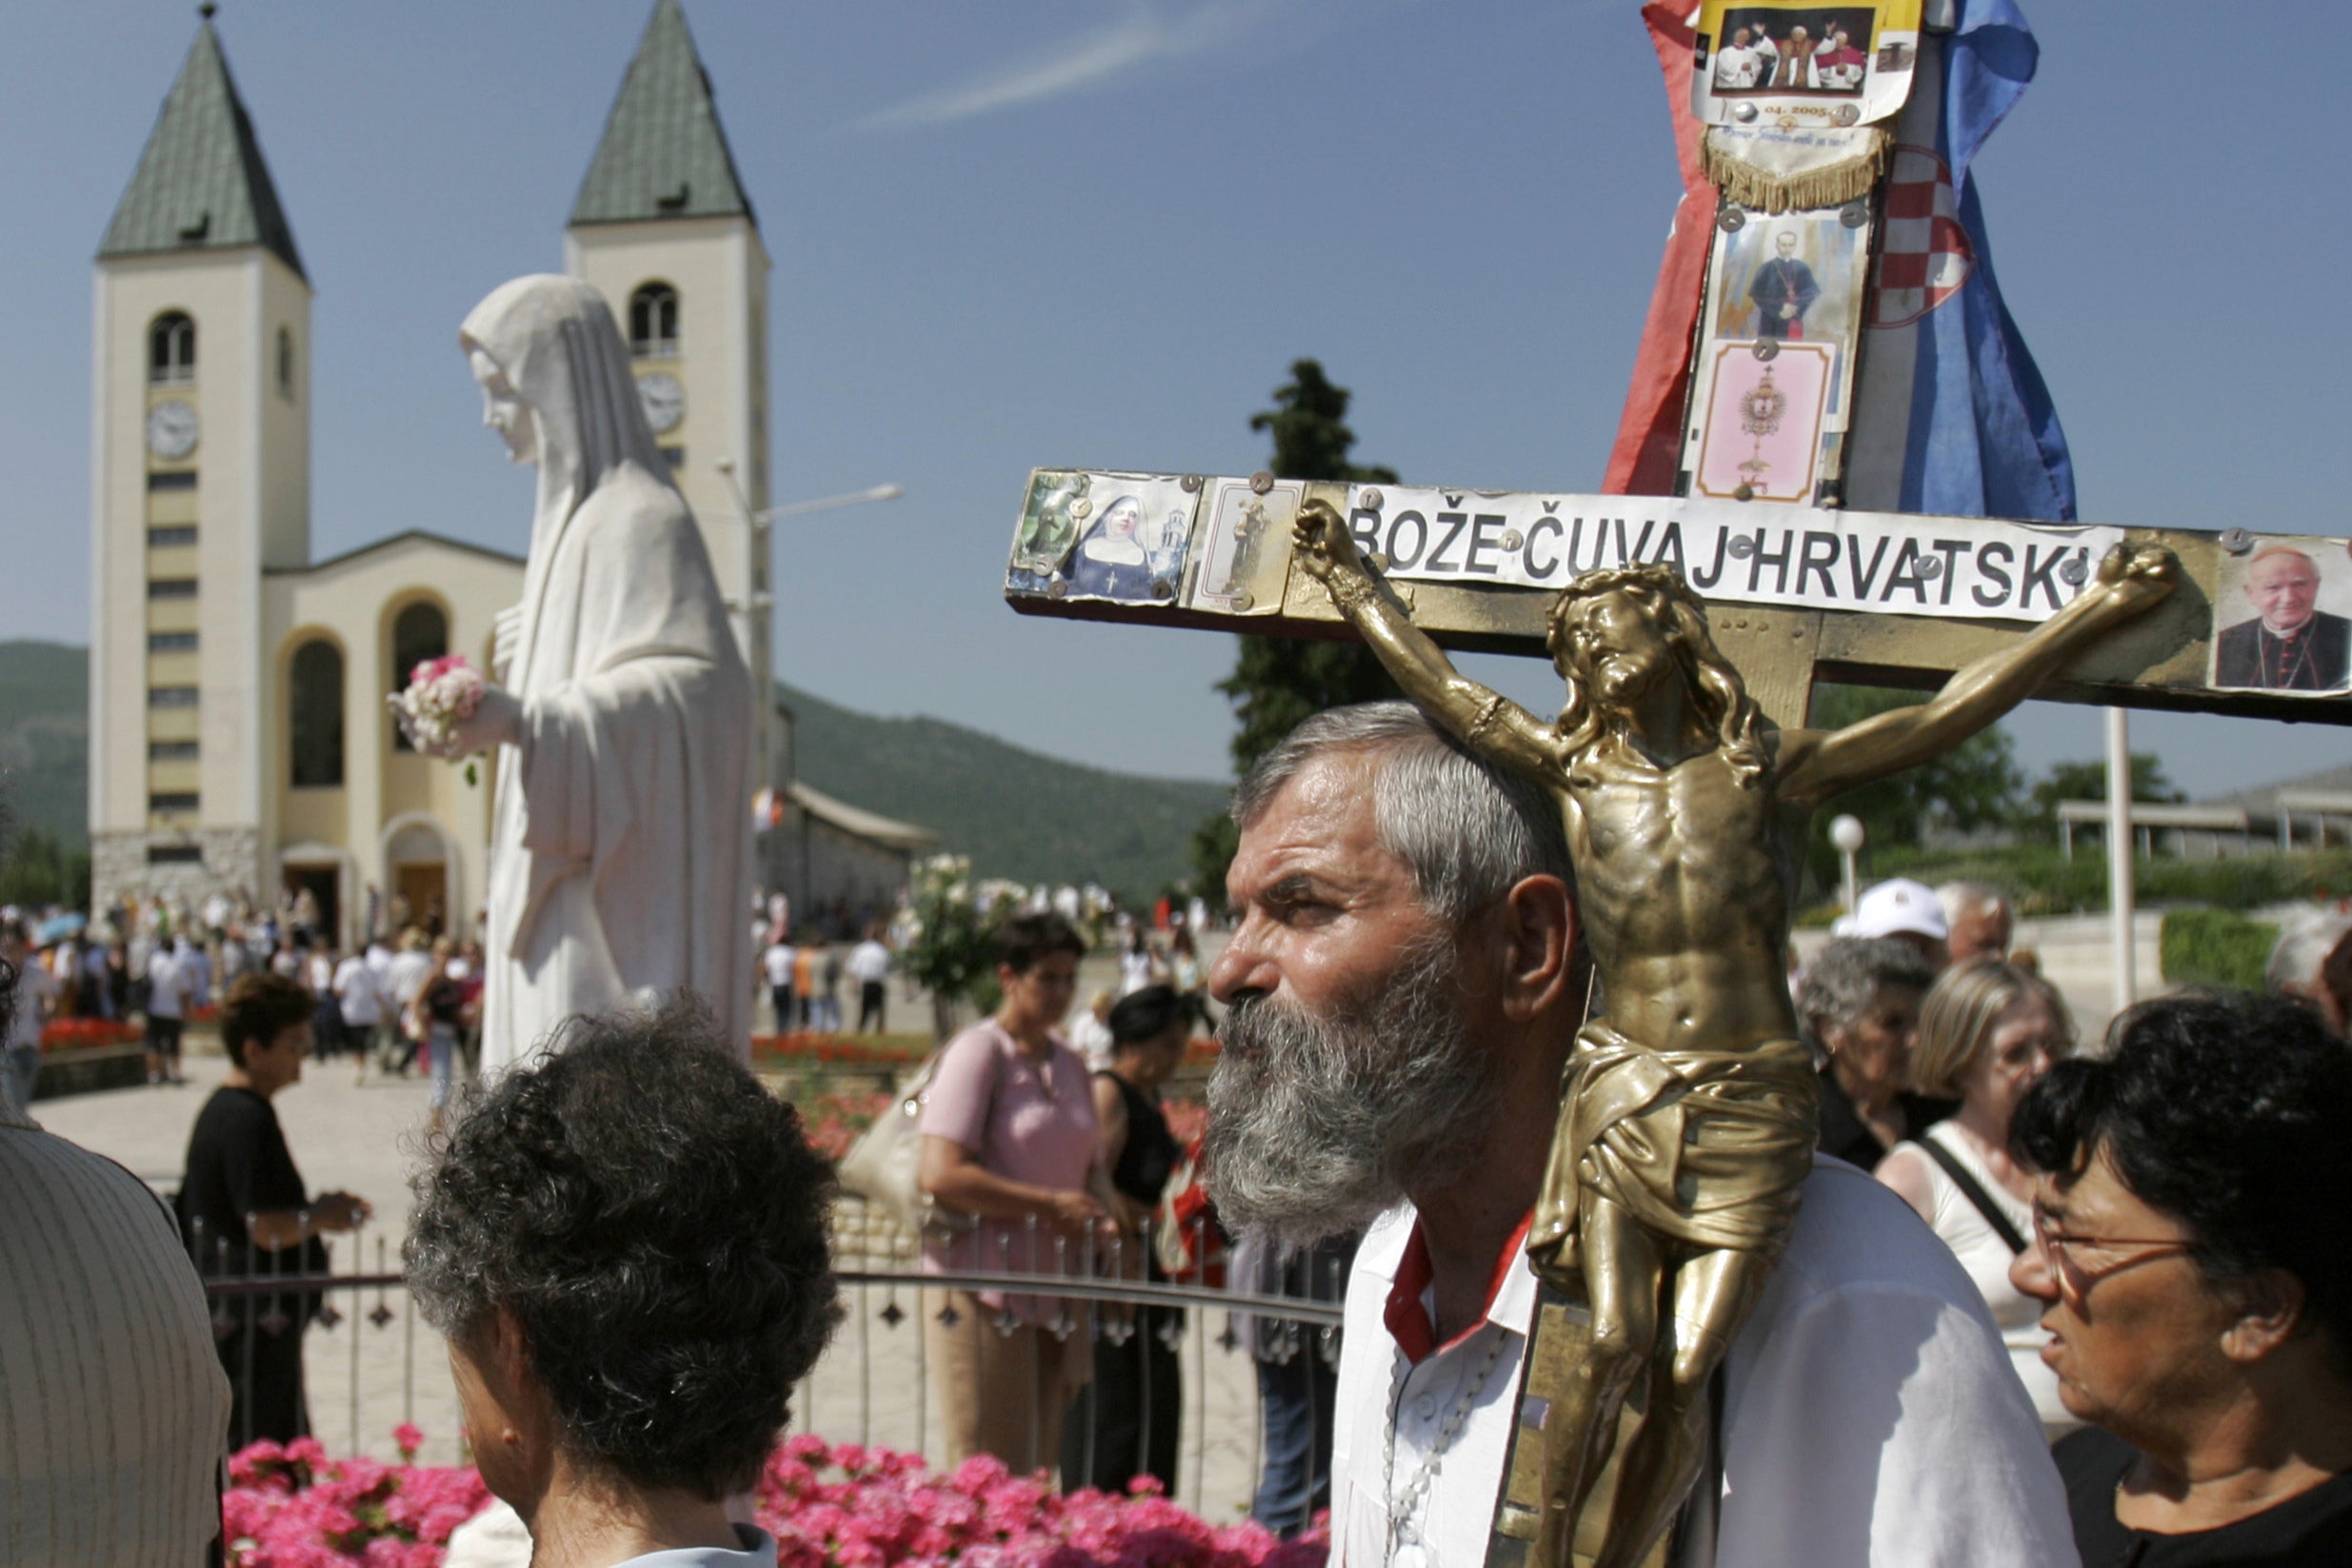 Pilgrims walk around a statue of the Blessed Virgin Mary near the church of St James in Medjugorje, Bosnia and Herzegovina